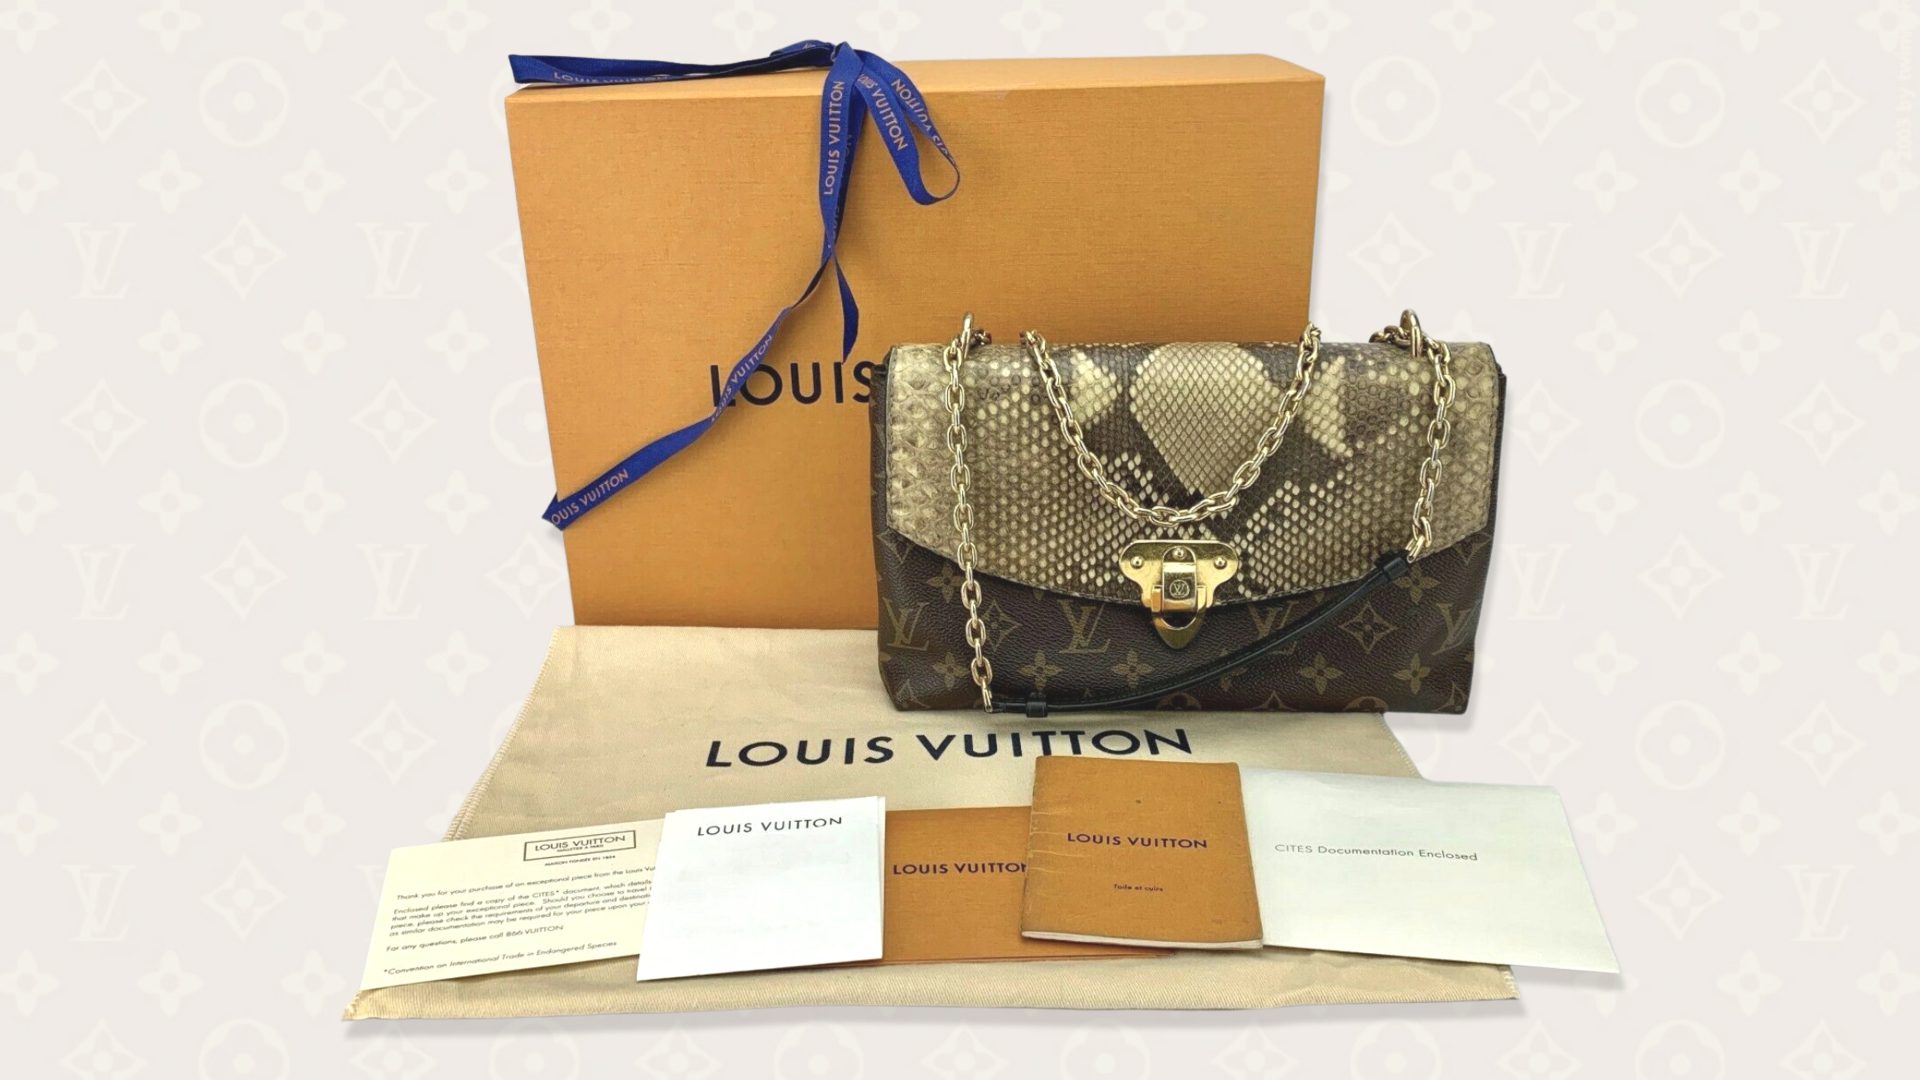 Louis Vuitton Handbag with dust bag and authentication papers